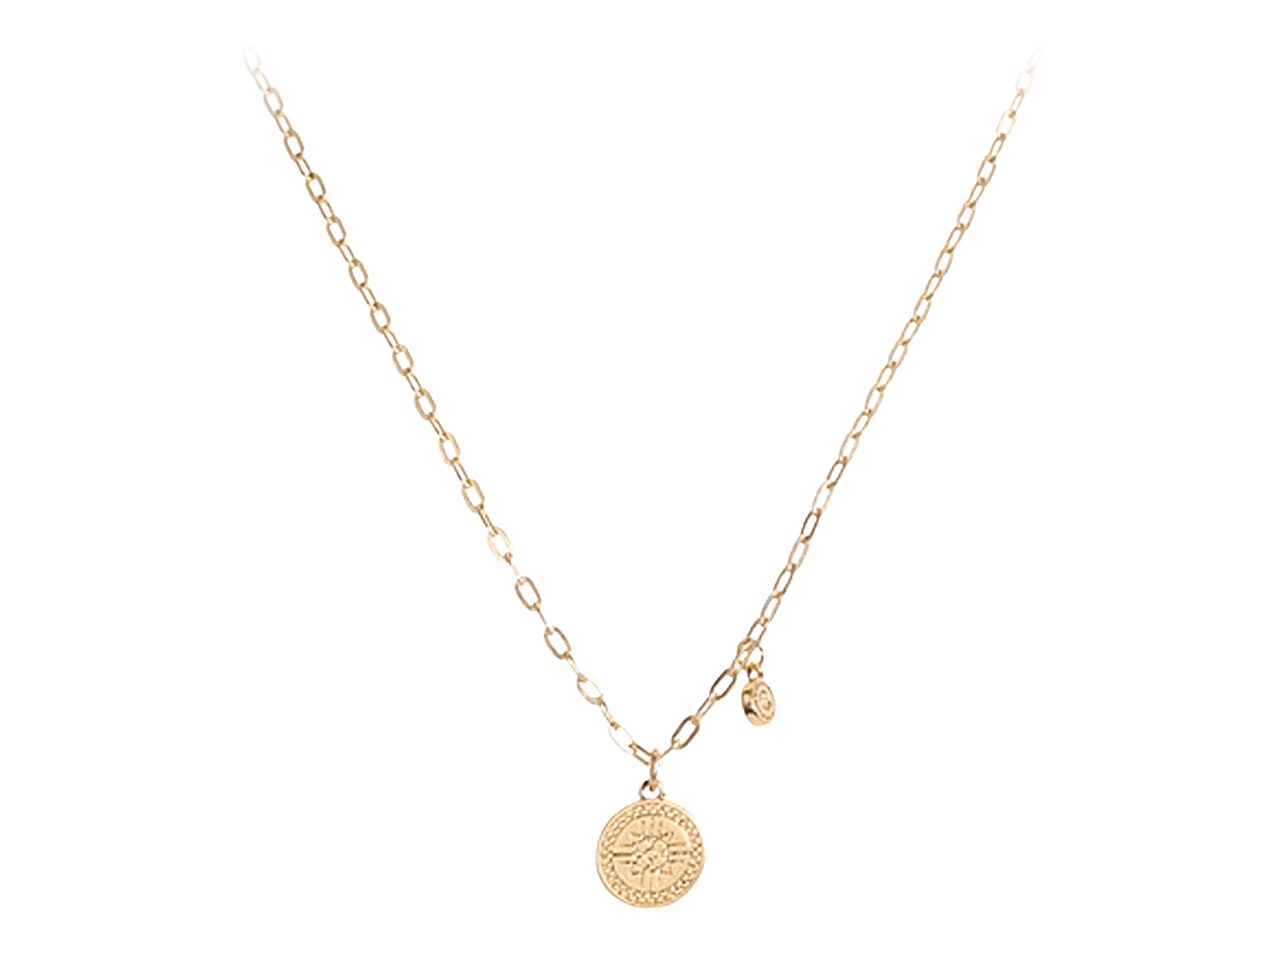 Rebecca Minkoff Etched Coin Necklace | DSW